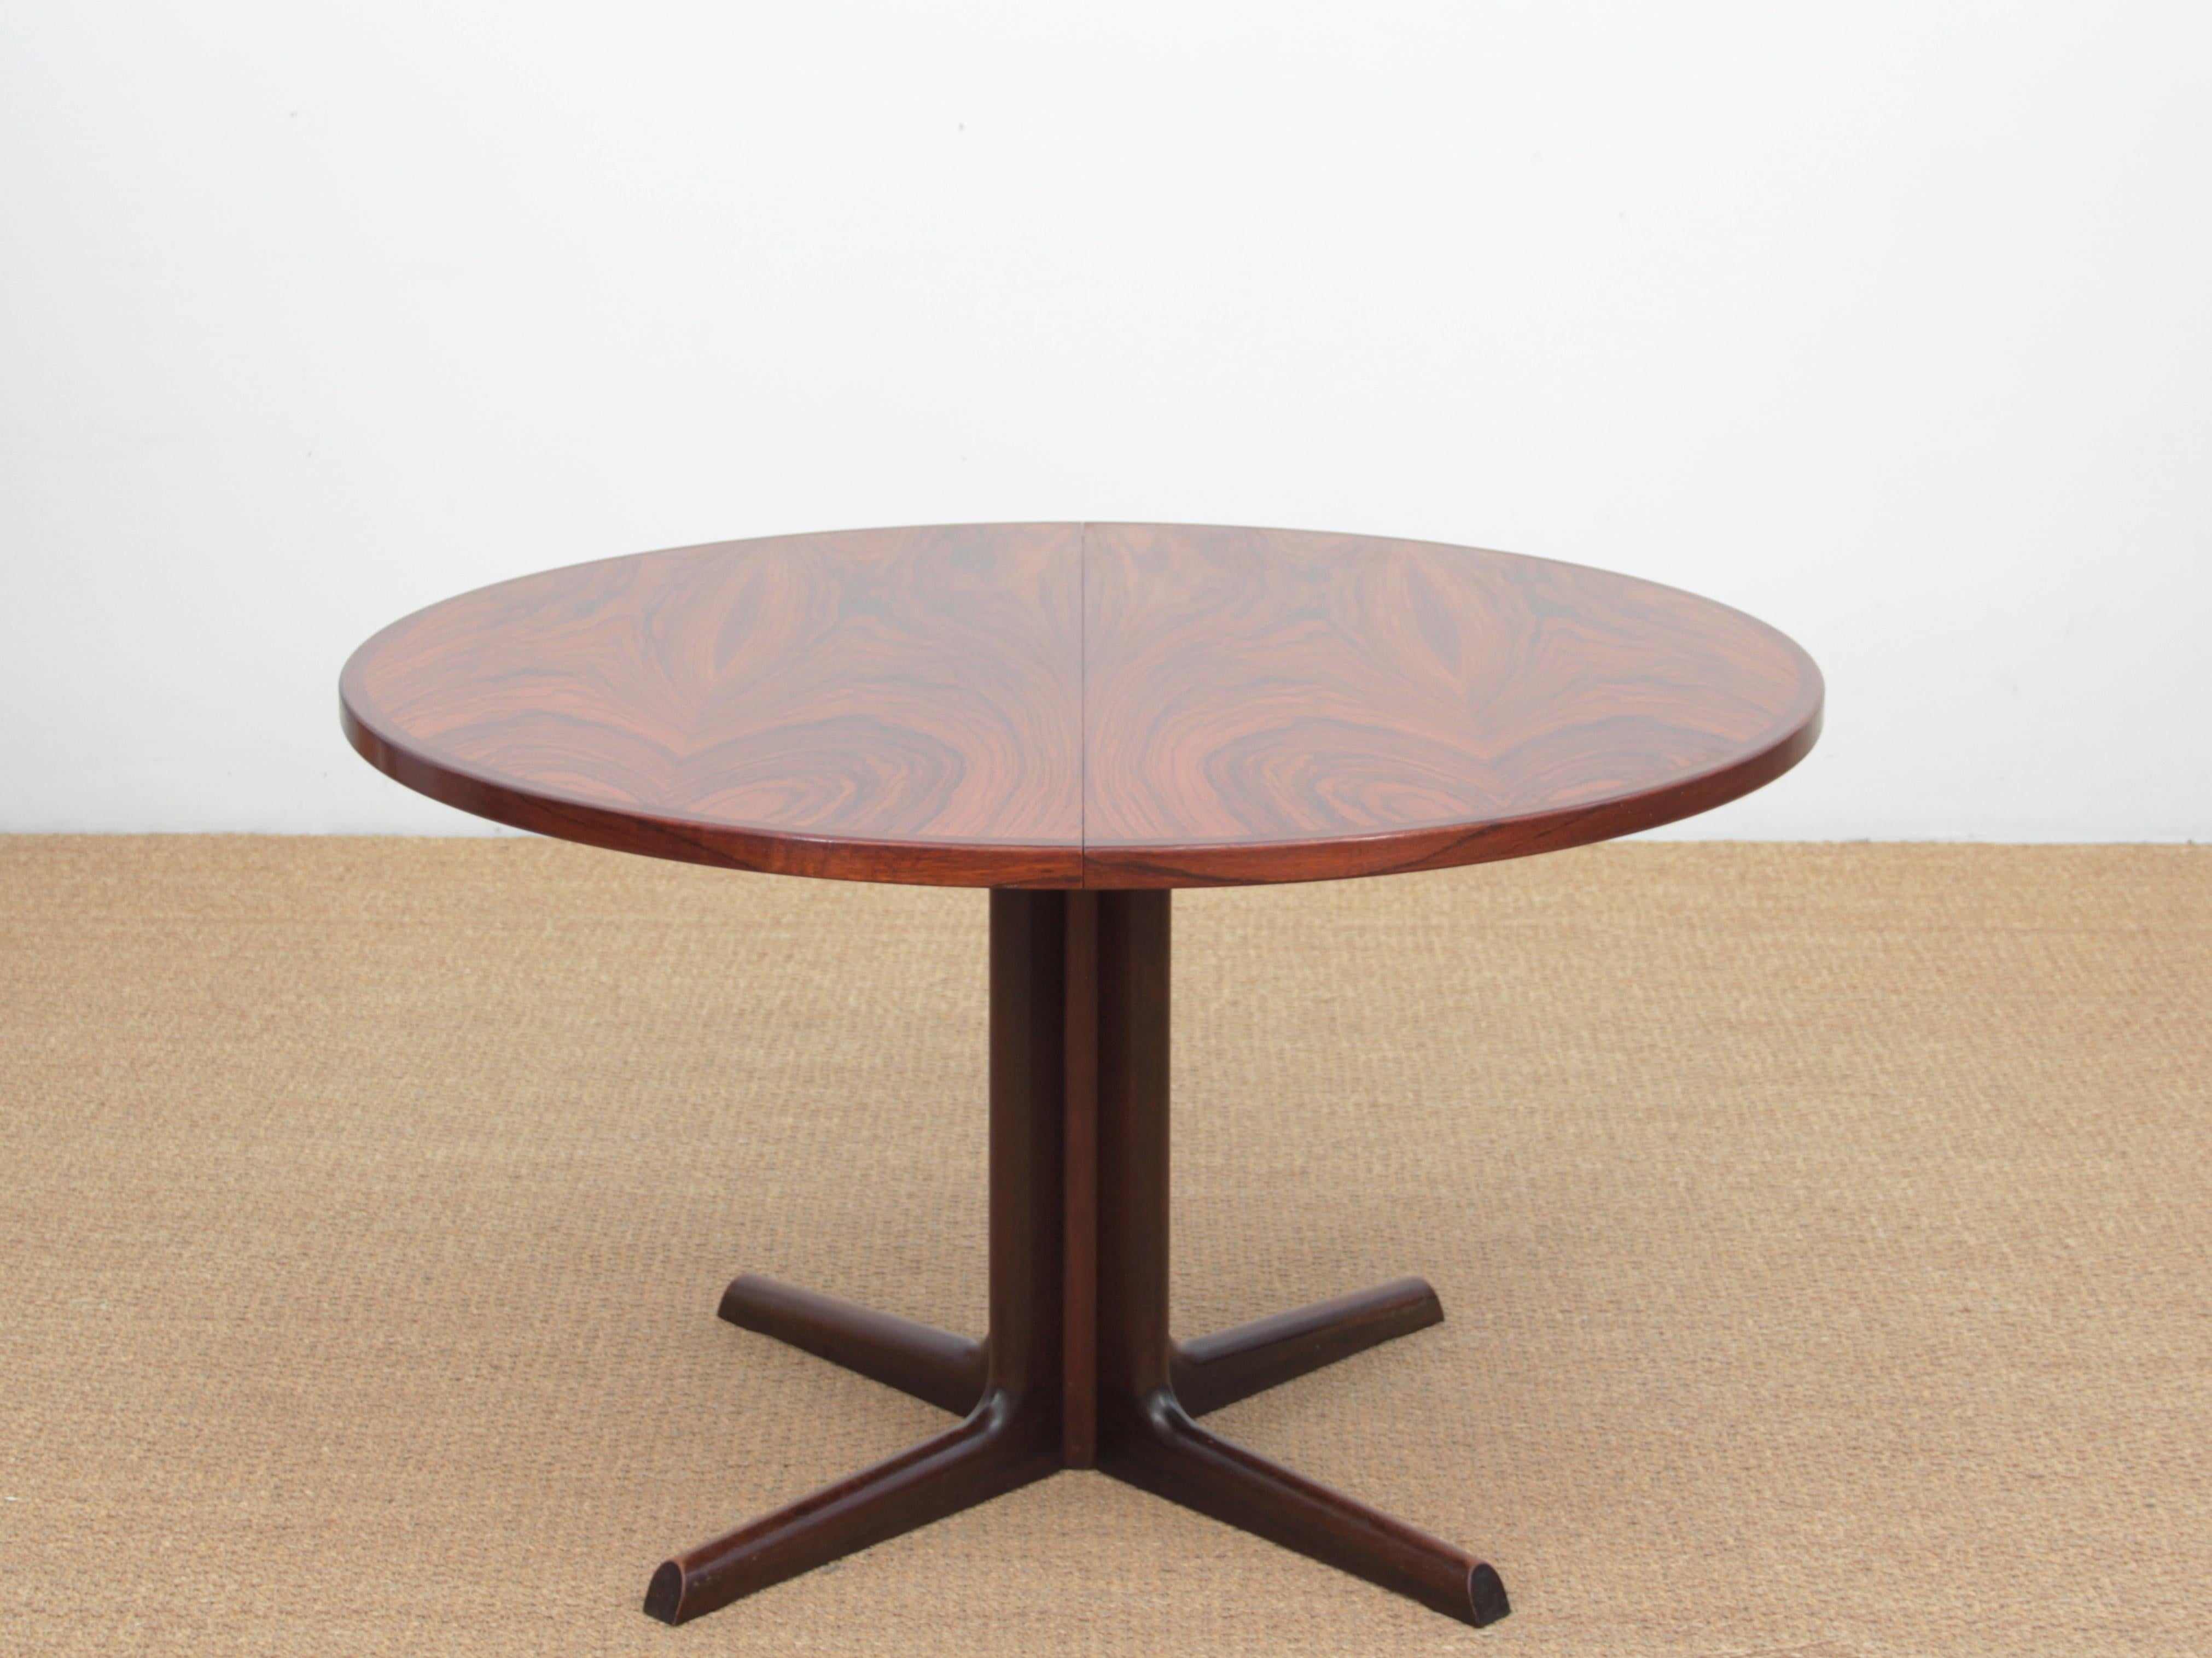 Mid-Century Modern Scandinavian dining table from Gudme Møbelfabrik in rosewood. Central leg. 2 extra leaves. 6 to 10 seats

Measures: H 72 x Ø 120 cm. Leaves L 50 cm. W max 220 cm.